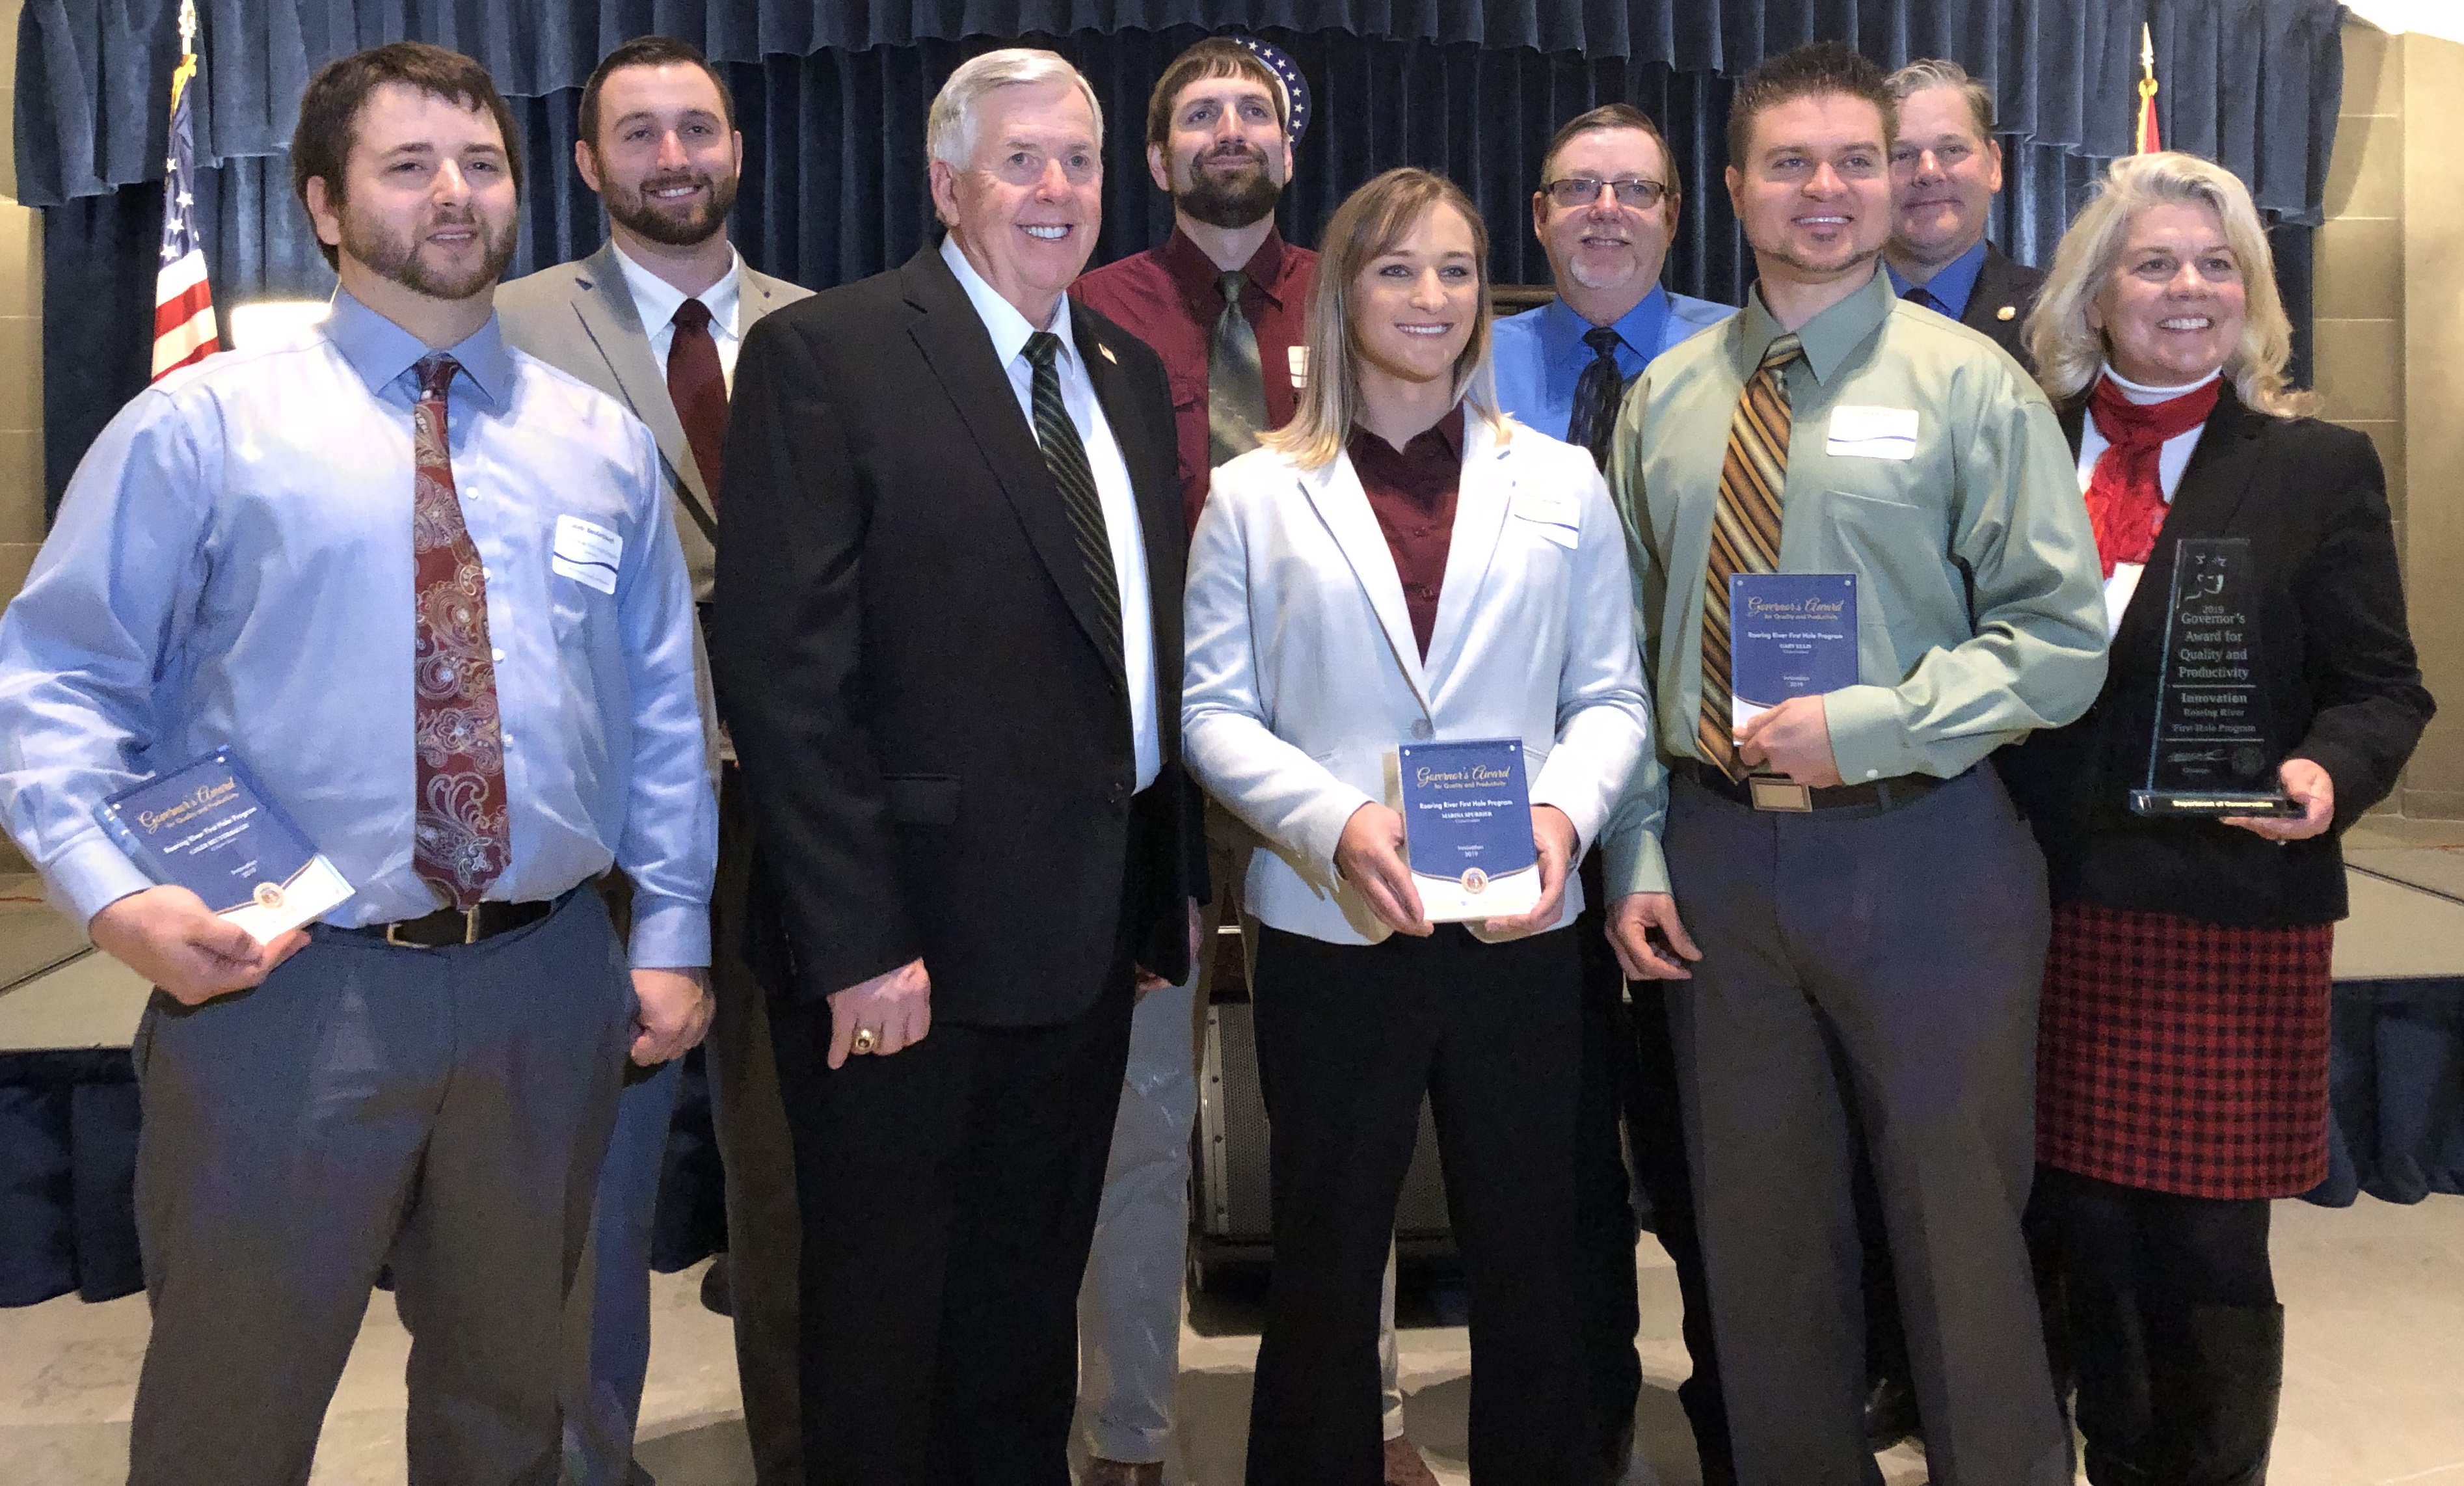 MDC Director Sara Parker Pauley poses with Governor Mike Parson and the Roaring River Fish Hatchery staff at the Missouri State Capitol.